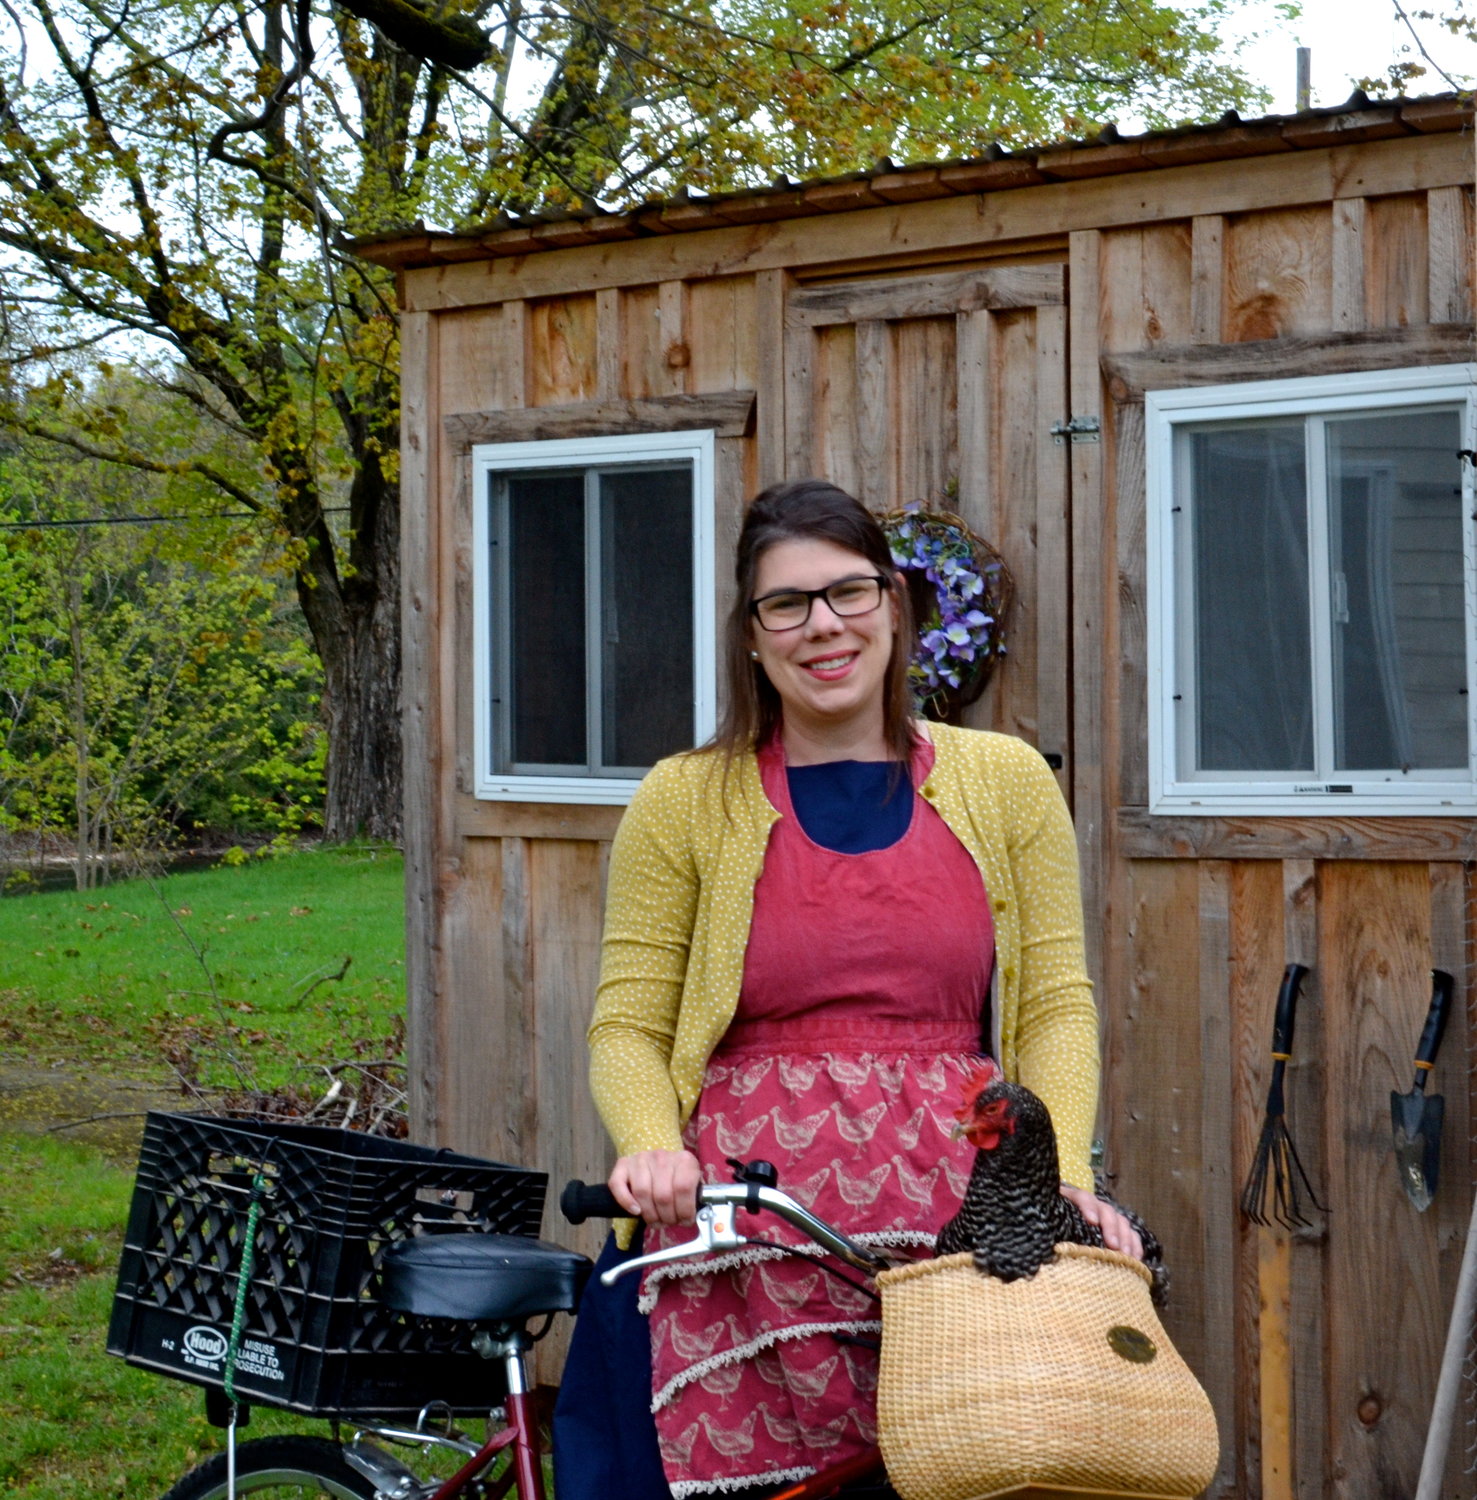 The Chicken Librarian doing what she does best: Trying to get the chickens to pose for pictures. Here is Gertie McGhee, who is not happy with being placed in a bike basket. Chicken Librarian dreams of taking bike rides with chickens while wearing chicken aprons. All in a day’s work.